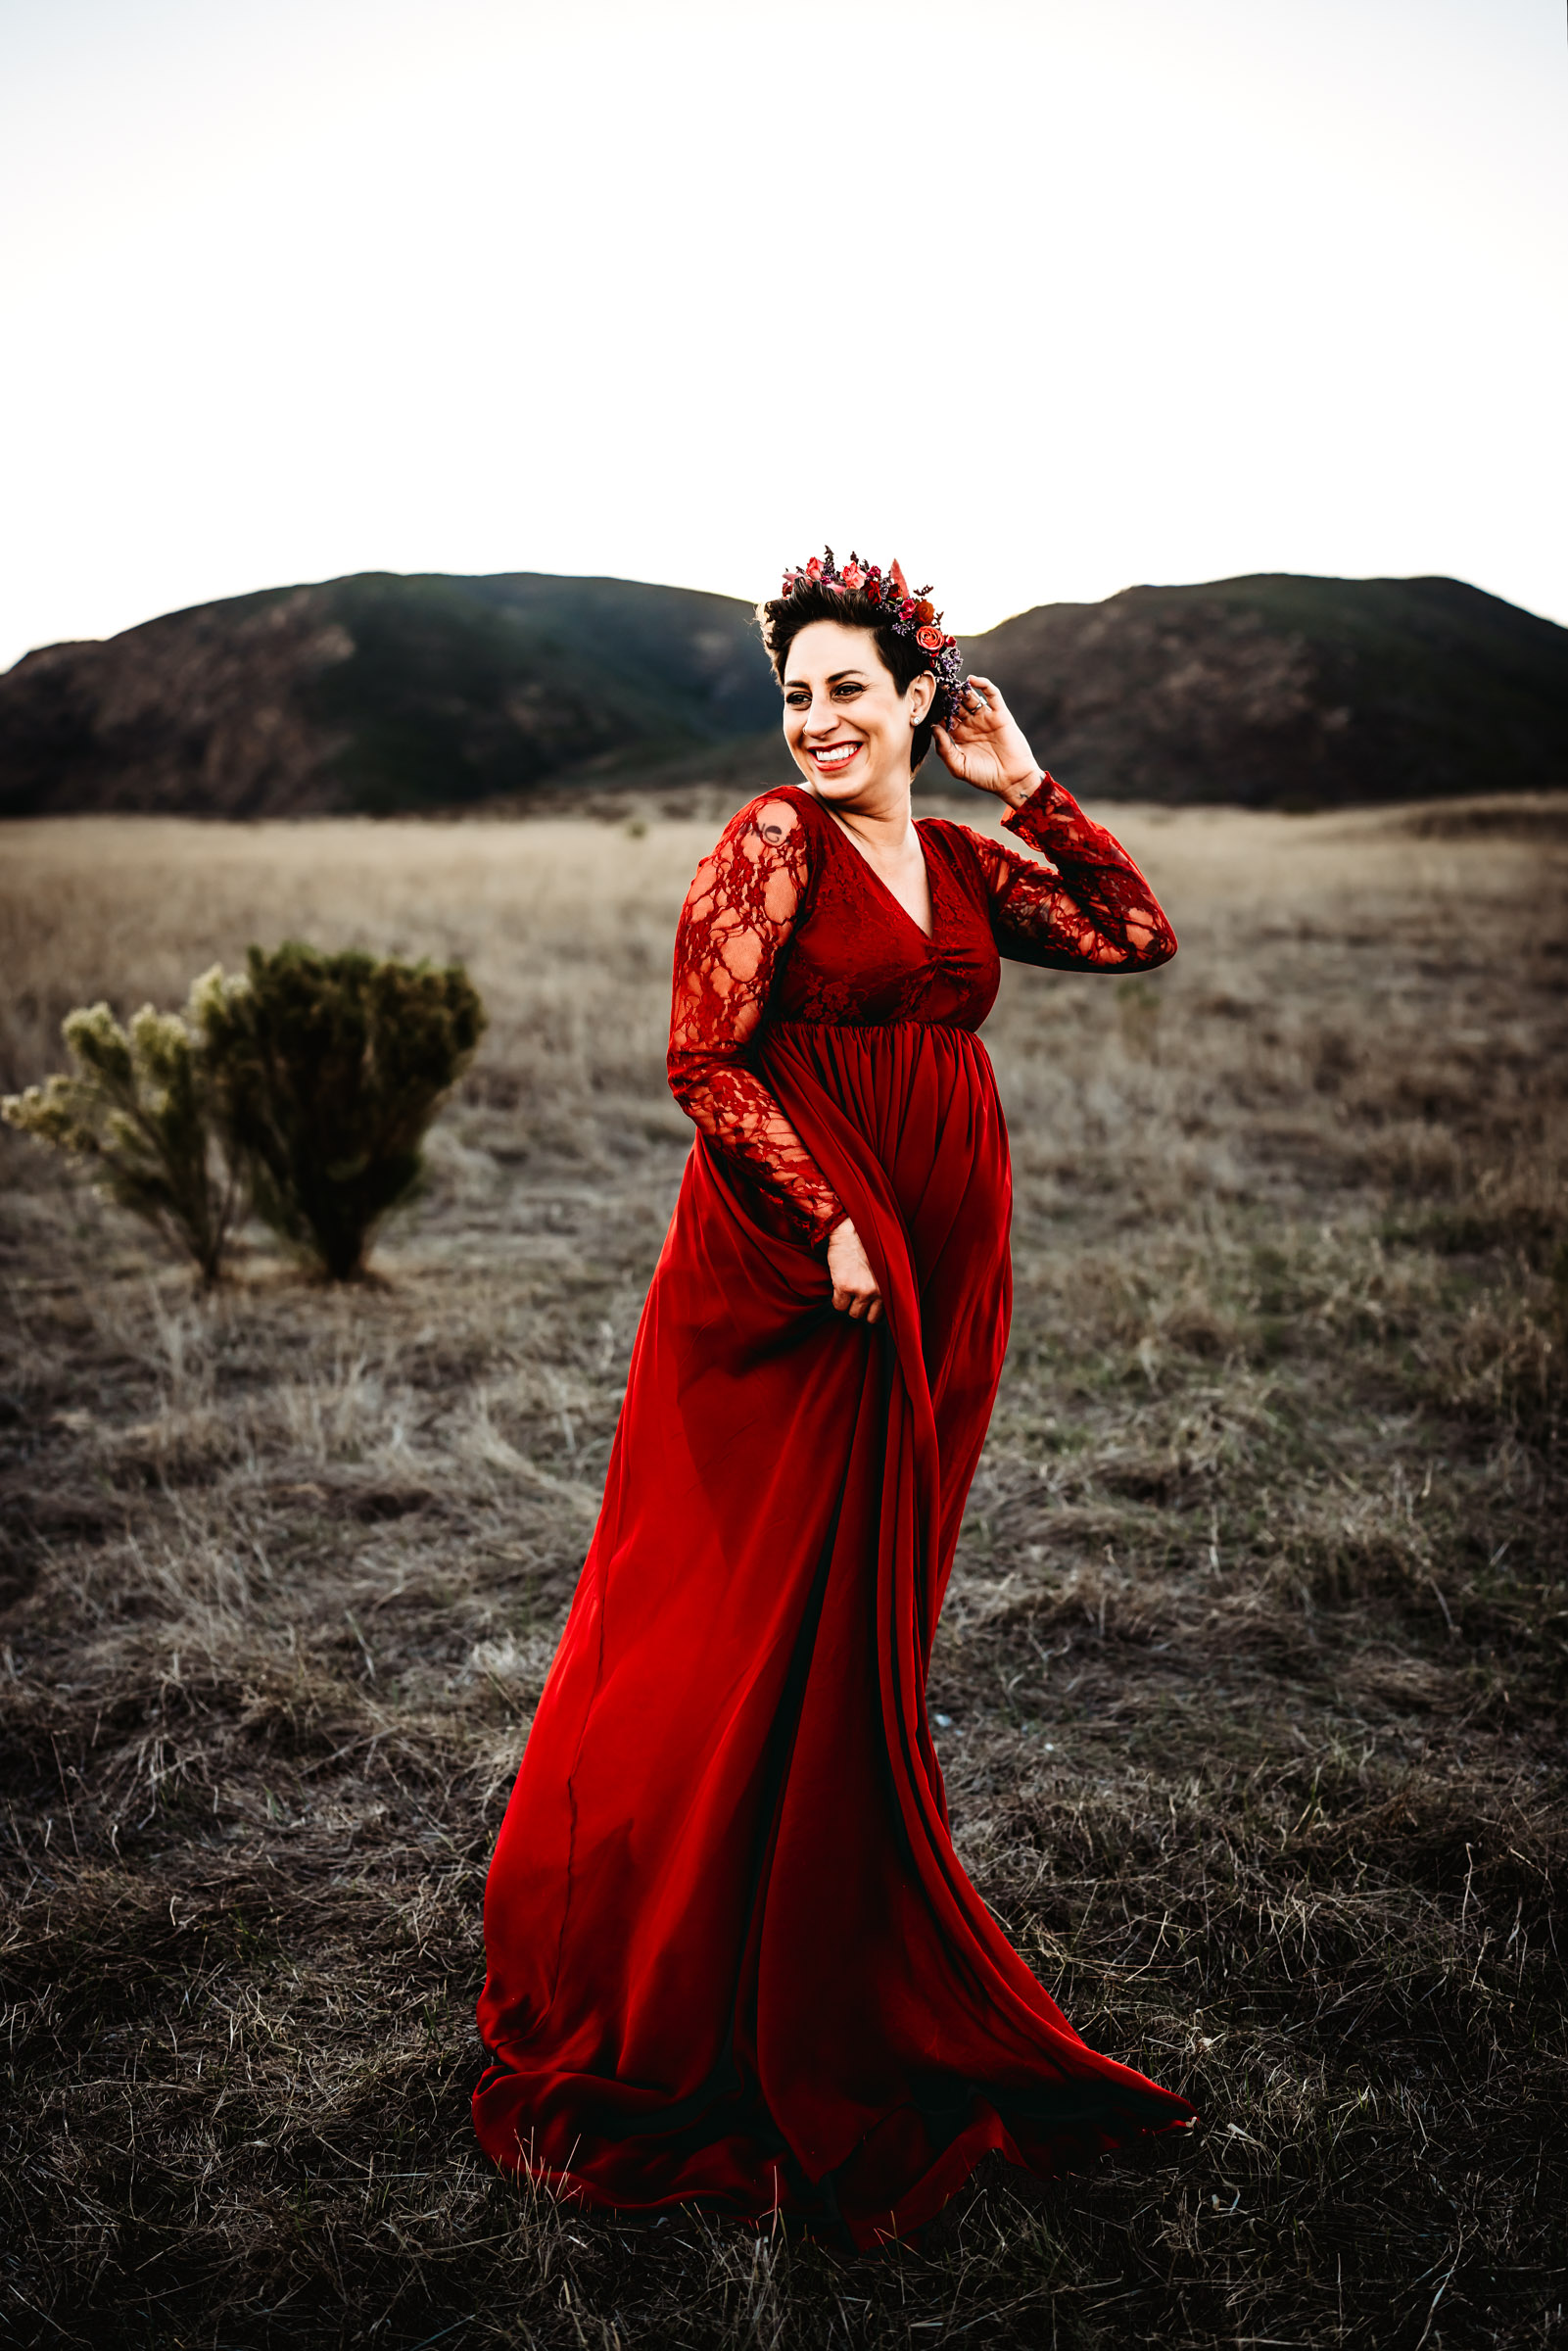 Pregnant woman wearing a red dress and flower crown laughing during a San Diego lifestyle maternity session in Mission Trails Regional Park